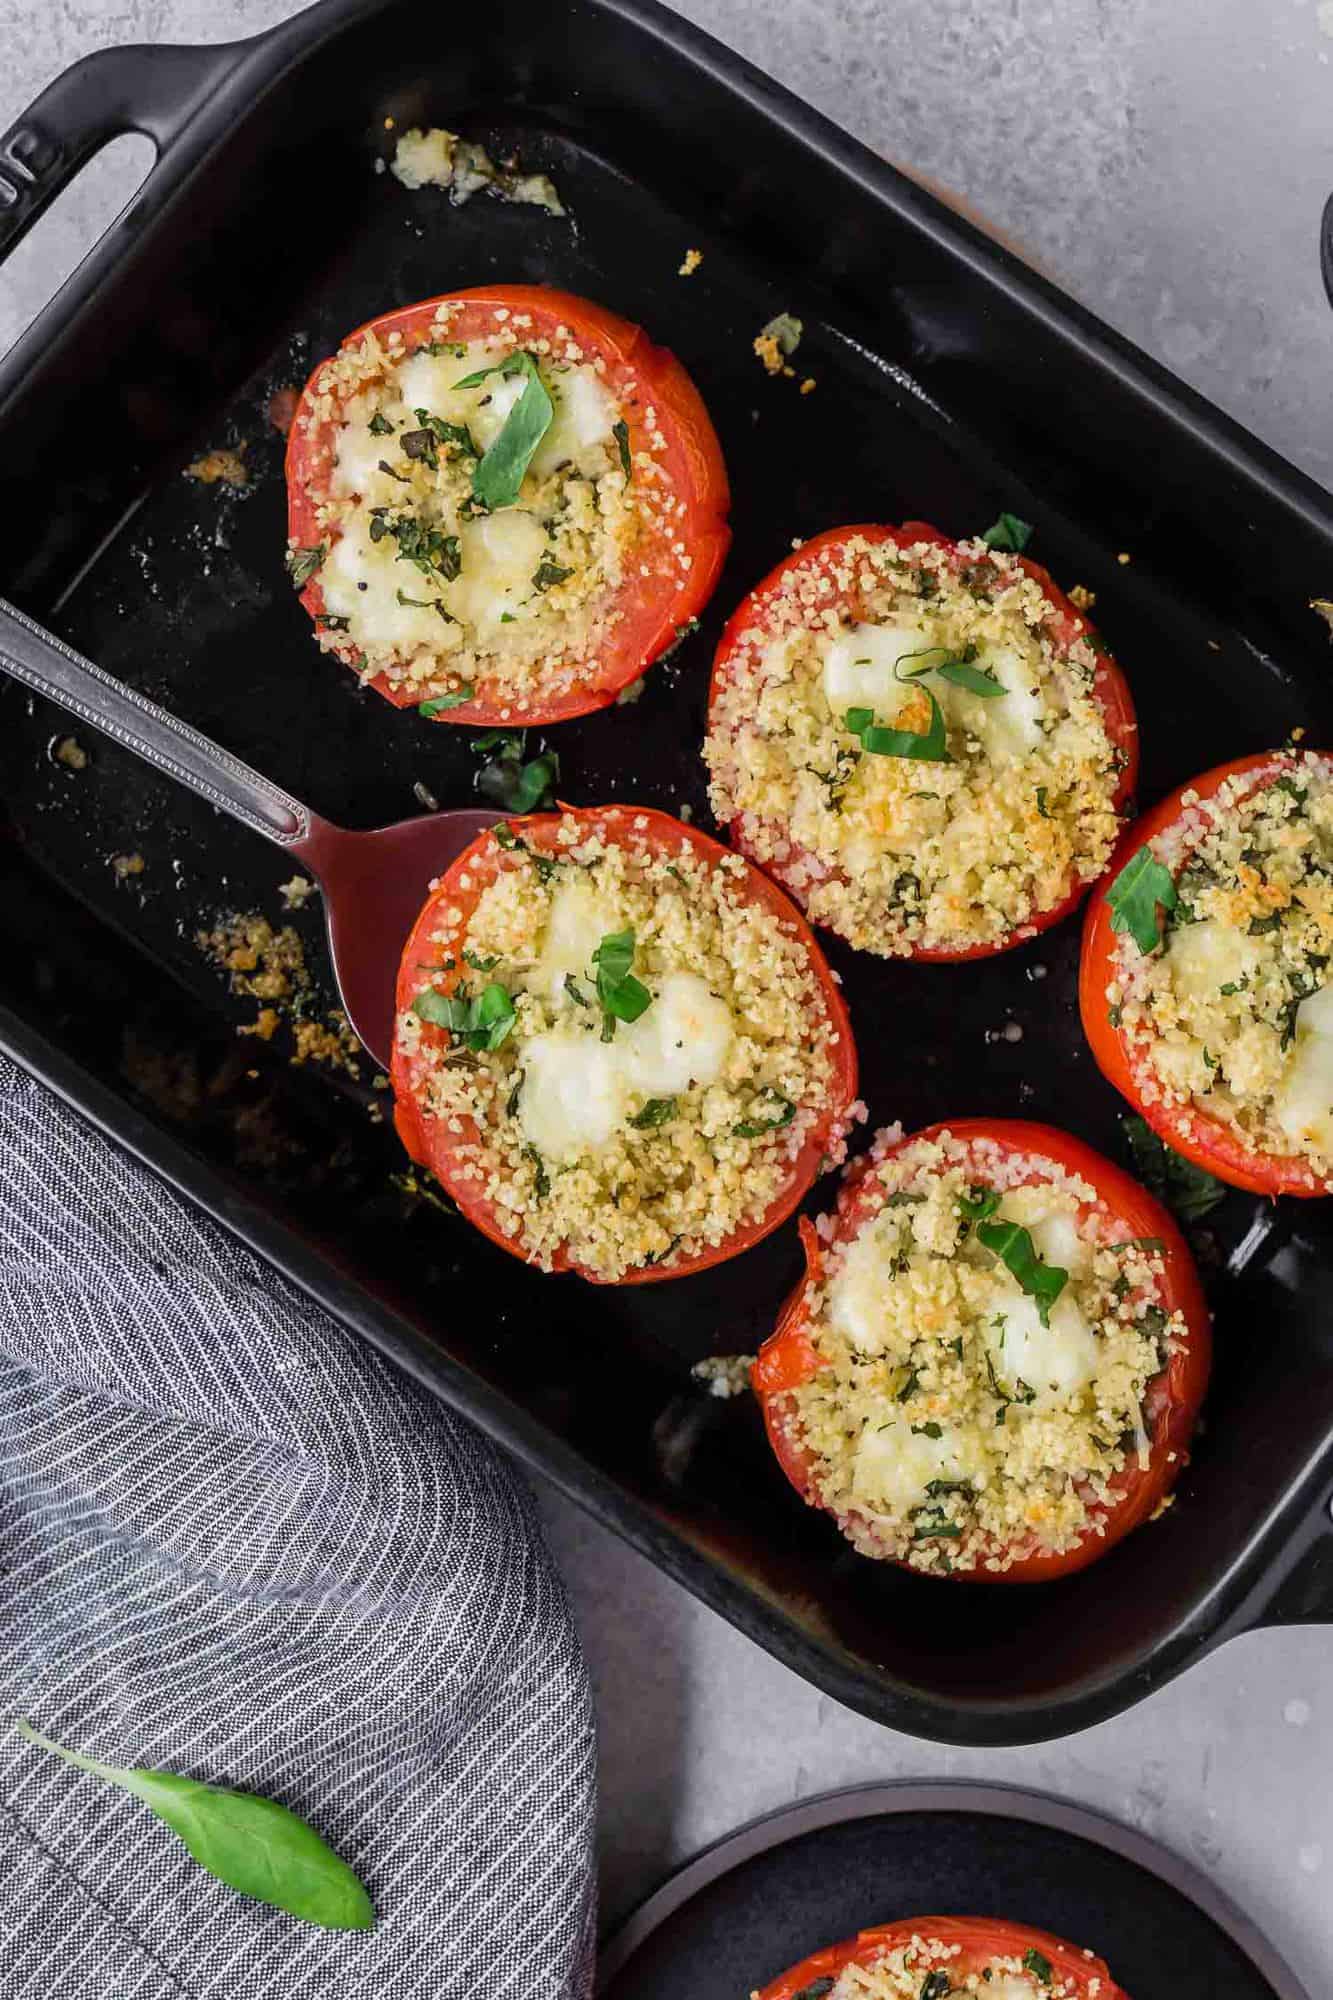 Overhead view of black baking dish with five stuffed tomatoes in it.